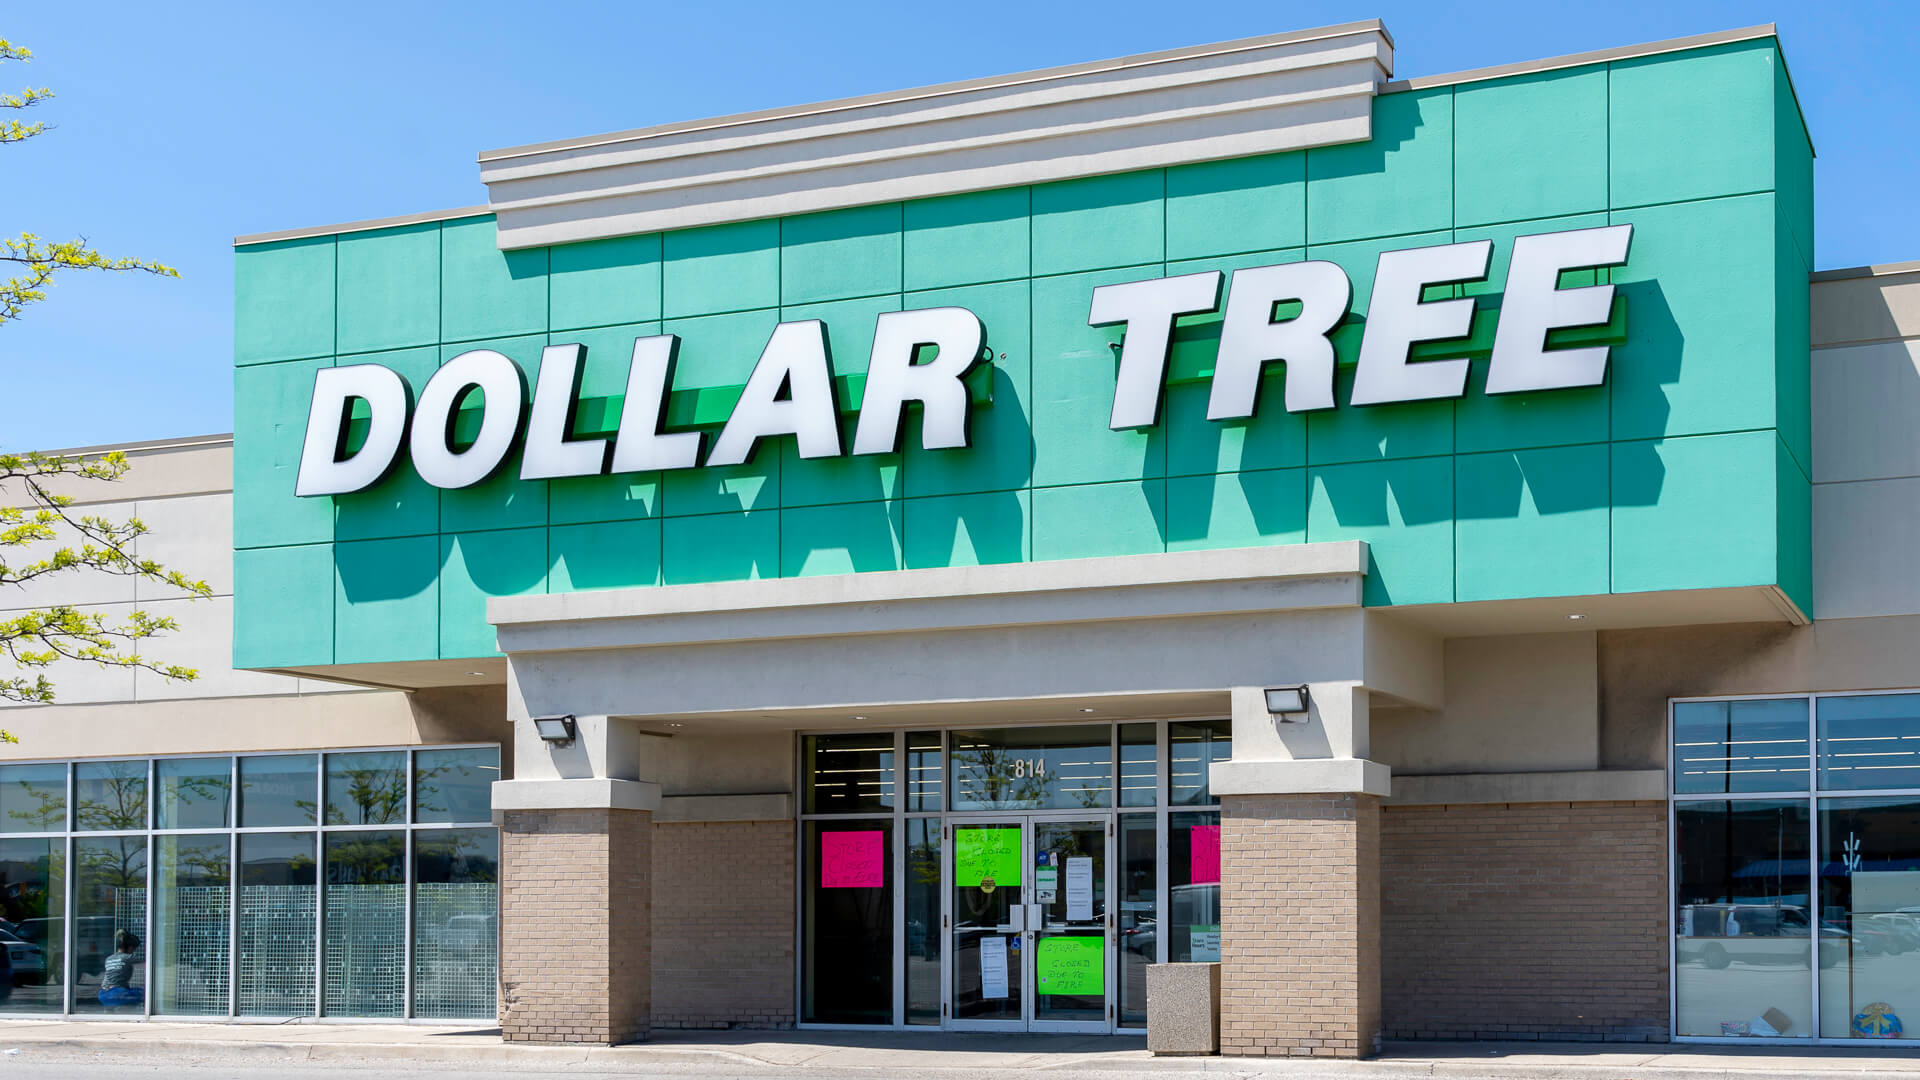 11 Grocery Items To Buy at Dollar Tree | GOBankingRates